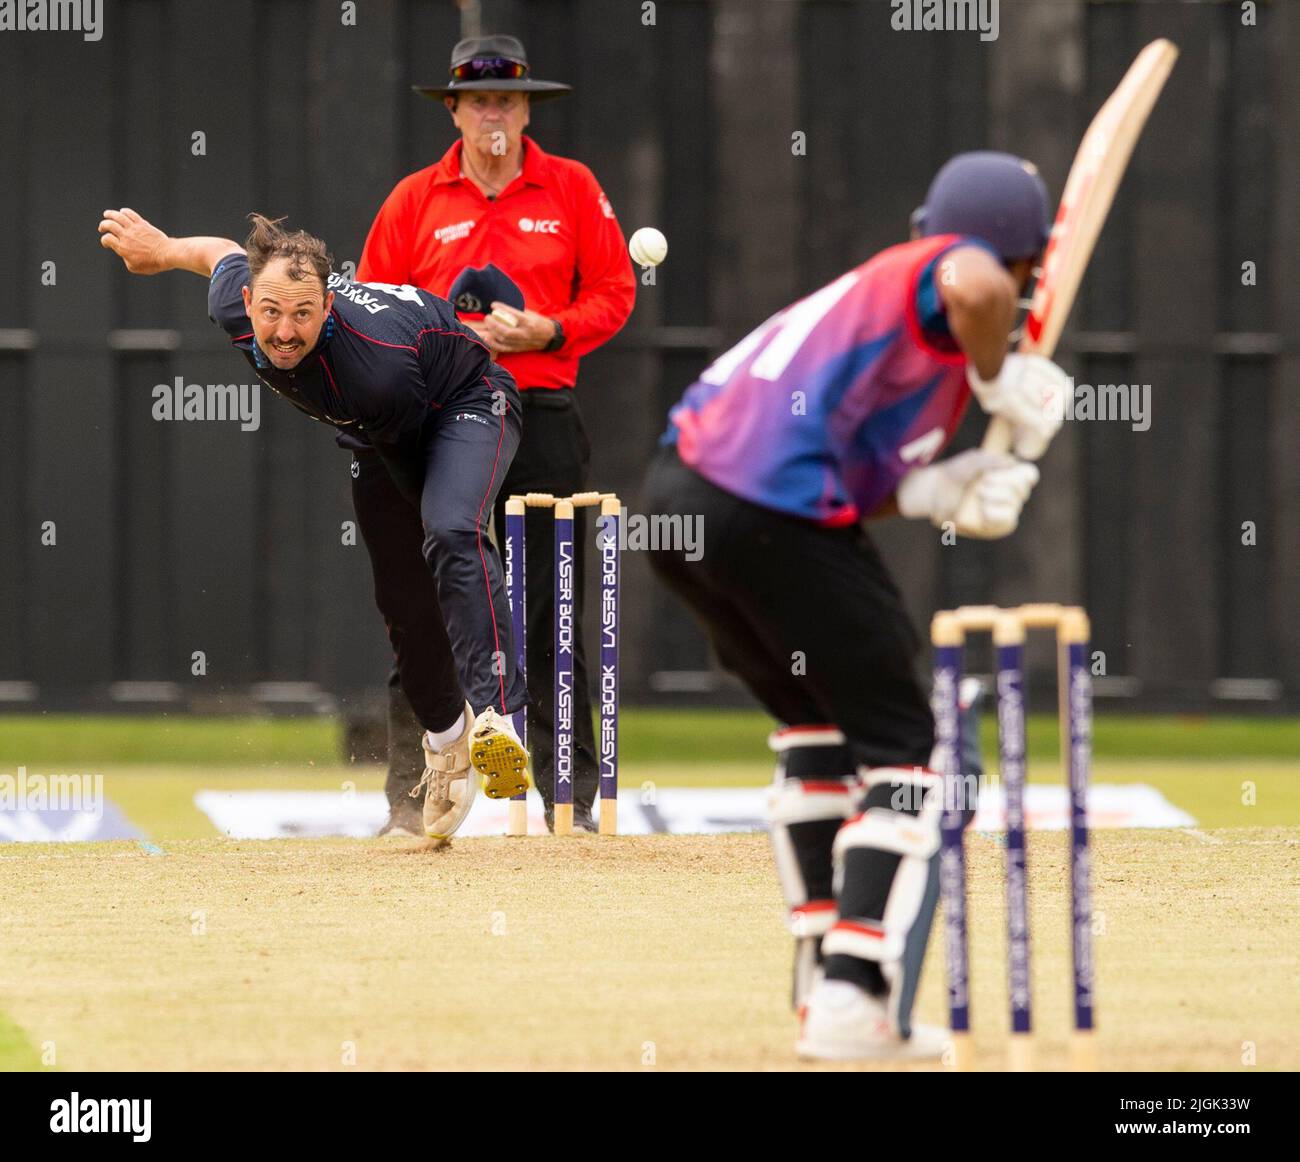 ICC Men's Cricket World Cup League 2 - Nepal v, Namibia. 10th July, 2022. Nepal take on Namibia in the ICC Men's Cricket World Cup League 2 at Cambusdoon, Ayr. Pic shows: Namibia's Jan Frylinck bowls. Credit: Ian Jacobs/Alamy Live News Stock Photo